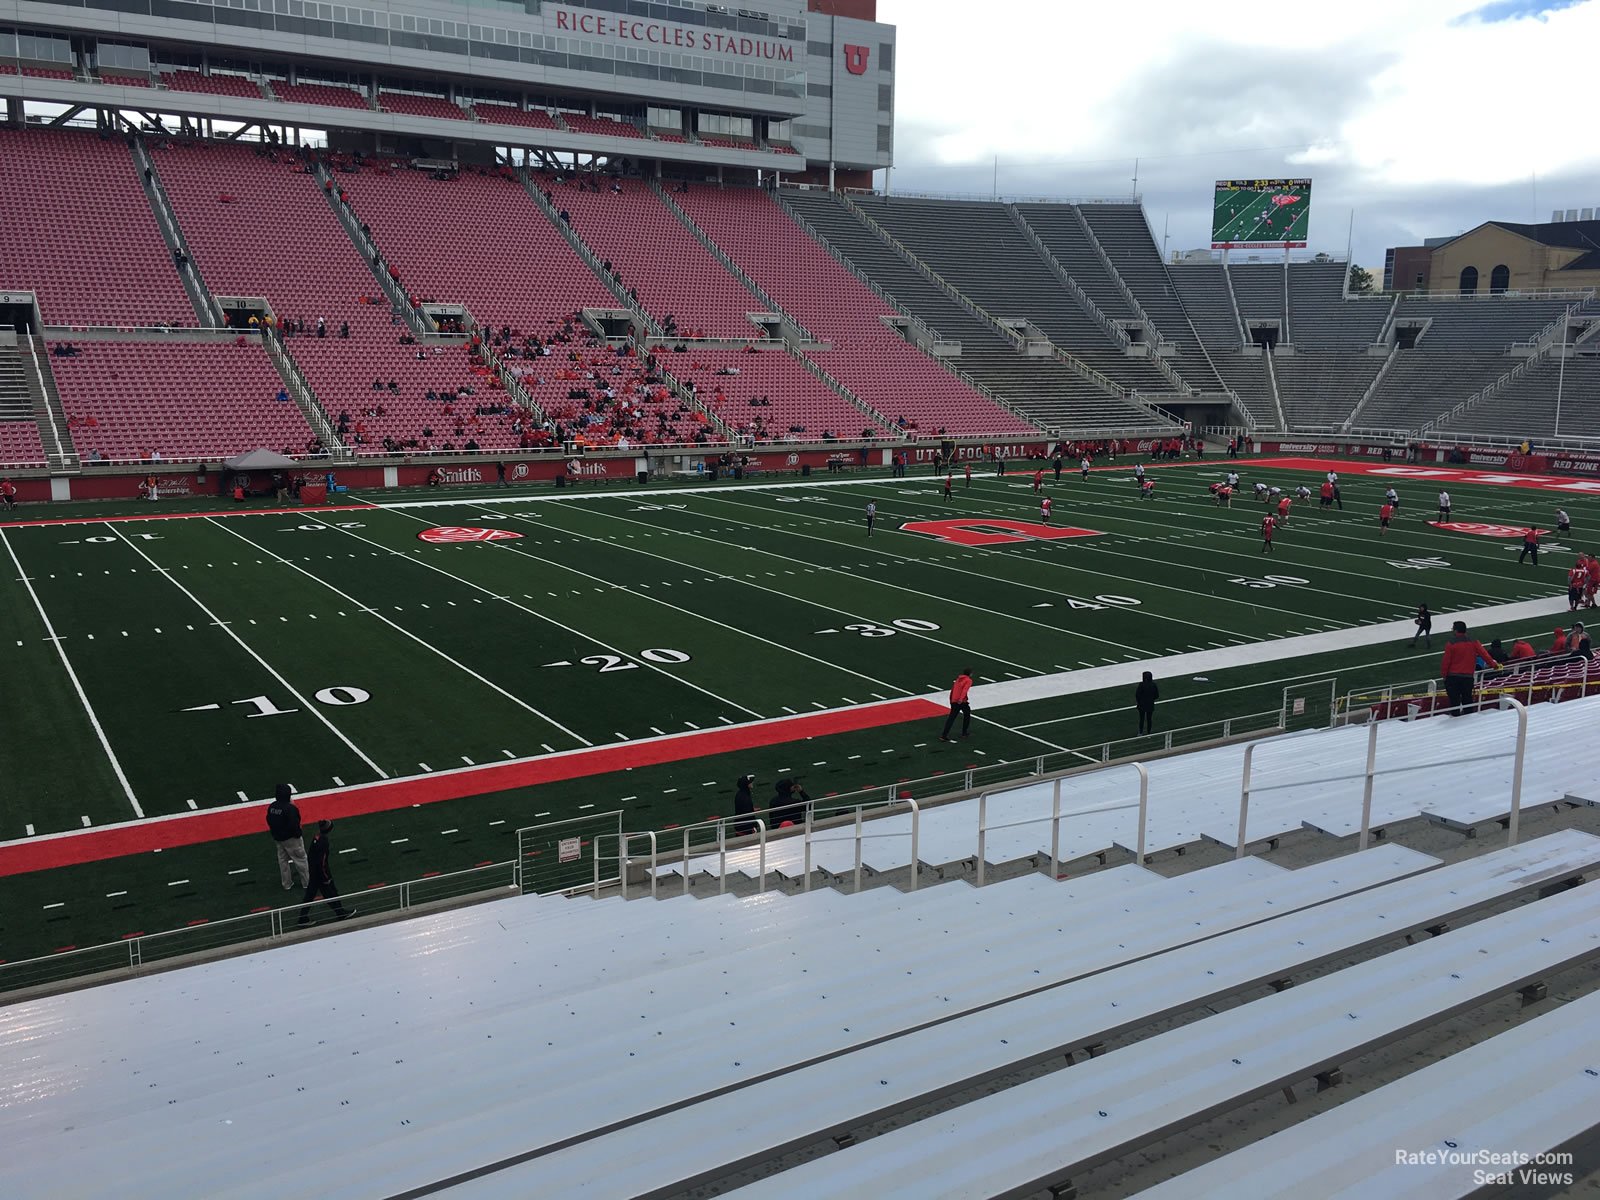 section e39, row 20 seat view  - rice-eccles stadium